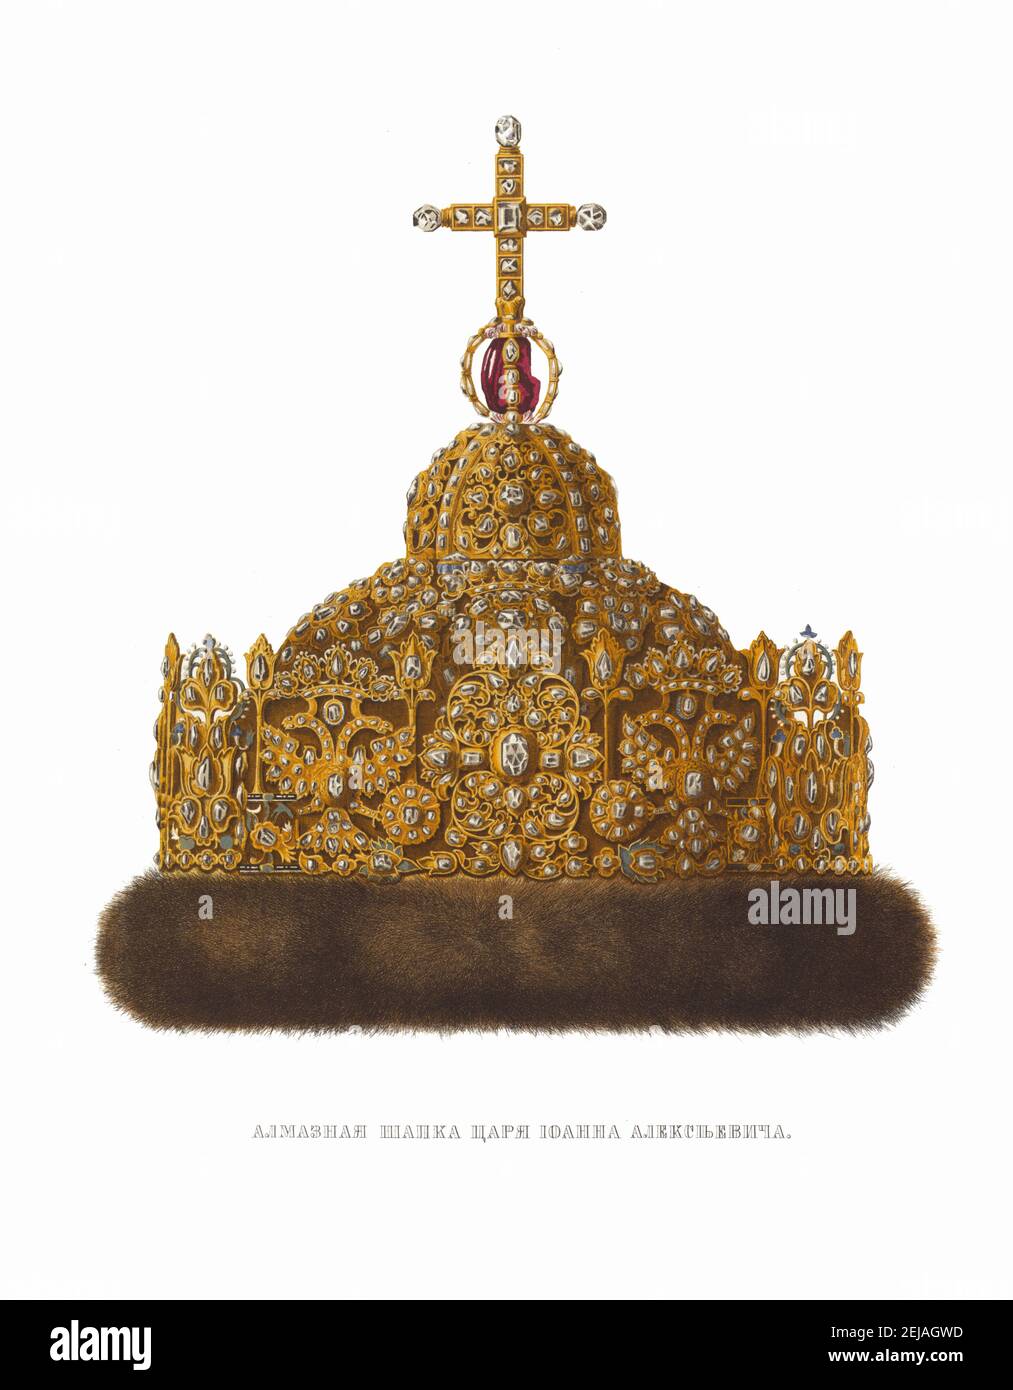 Diamond Cap of Tsar Ivan V. From the Antiquities of the Russian State. Museum: PRIVATE COLLECTION. Author: Fyodor Grigoryevich Solntsev. Stock Photo